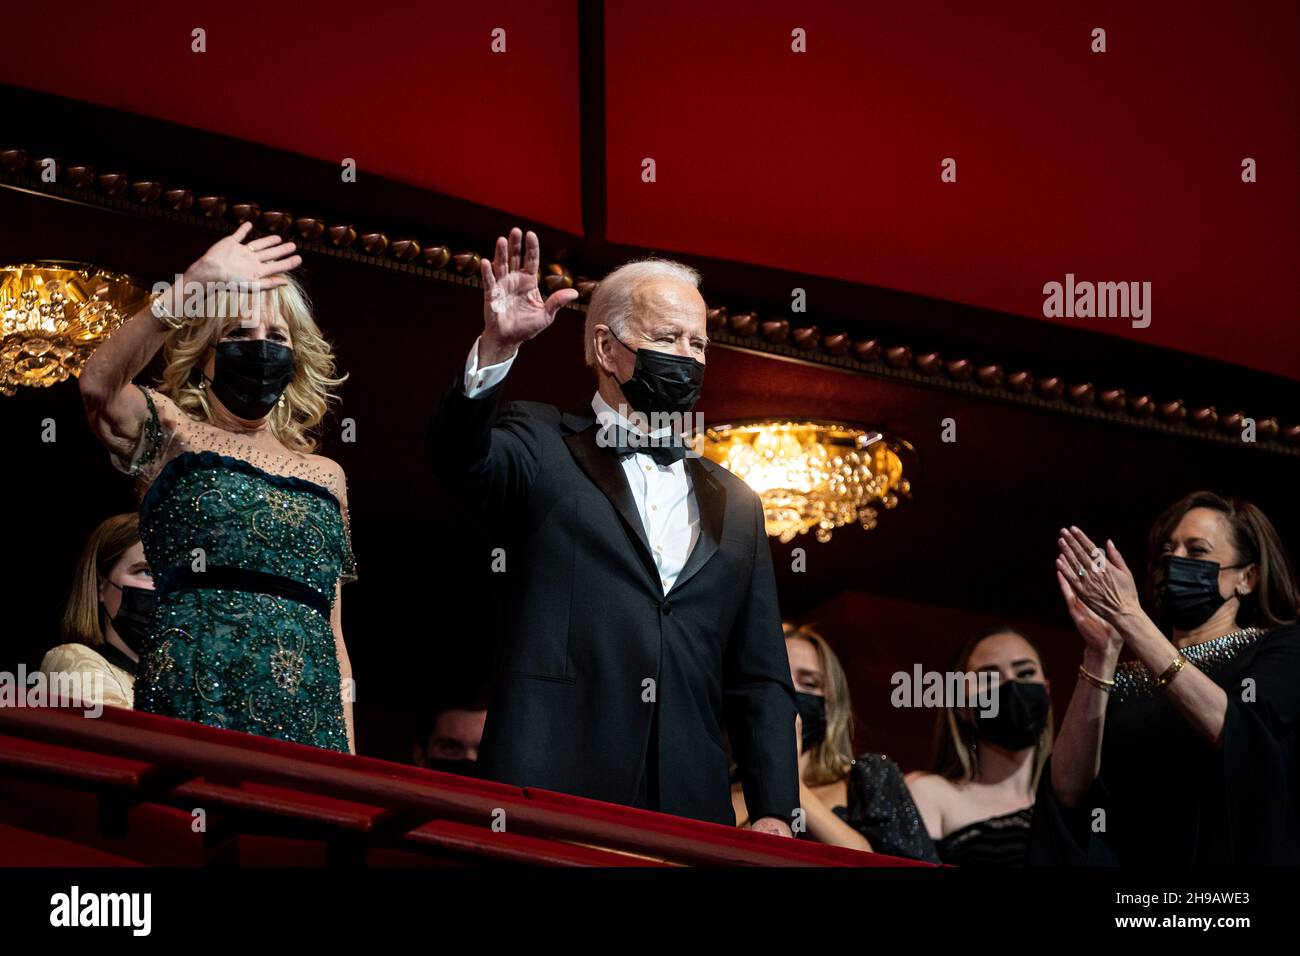 U.S. President Joe Biden and U.S. First Lady Jill Biden, arrive during the 44th Kennedy Center Honors at the John F. Kennedy Center for the Performing Arts in Washington, DC, U.S., on Sunday, Dec. 5, 2021. The 44th Honorees for lifetime artistic achievements include operatic bass-baritone Justino Diaz, Motown founder Berry Gordy, Saturday Night Live creator Lorne Michaels, actress Bette Midler, and singer-songwriter Joni Mitchell.Credit: Al Drago/Pool via CNP /MediaPunch Stock Photo